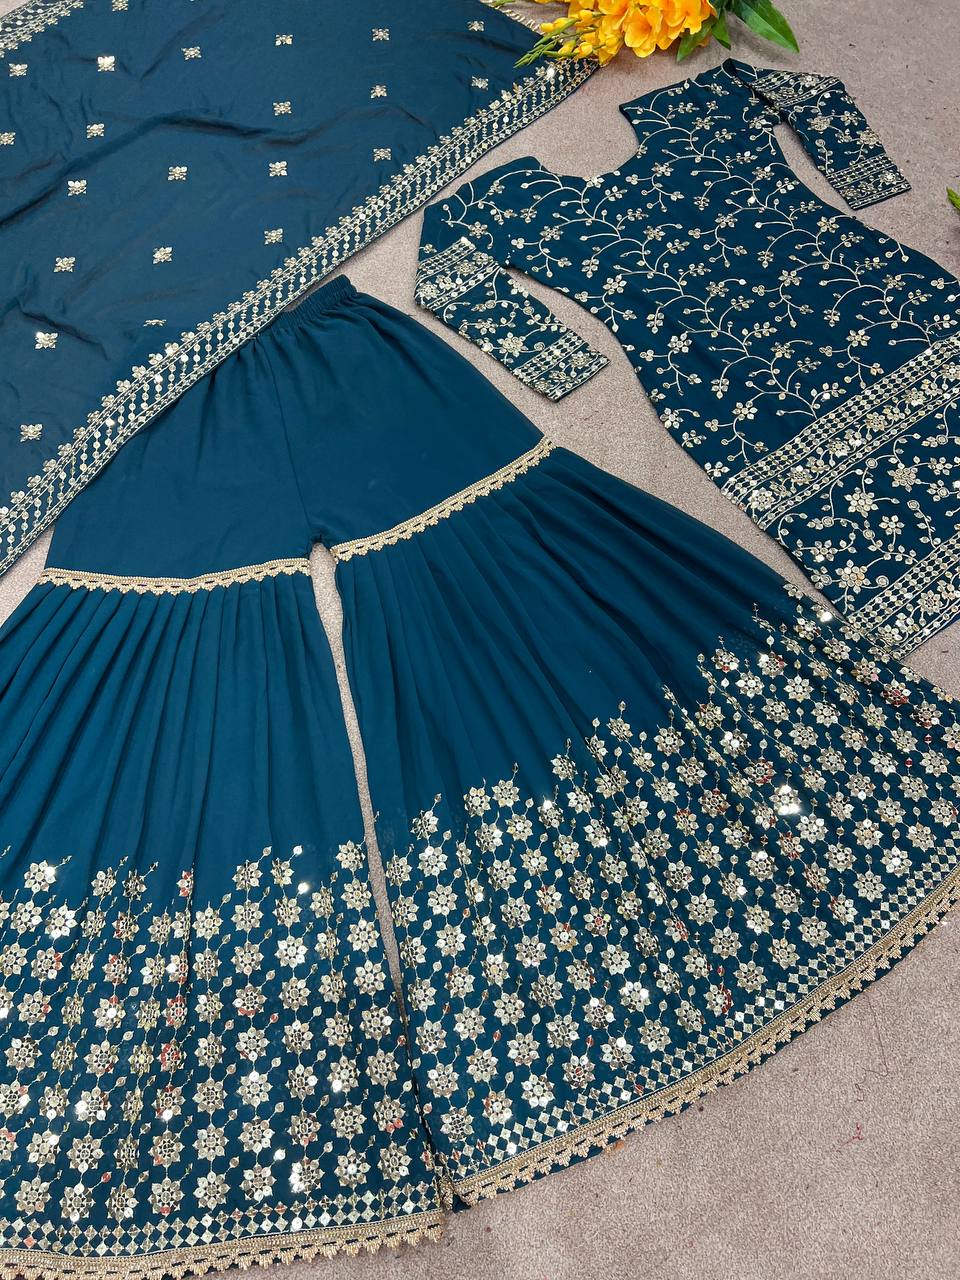 Exclusive Sequence Embroidery Work Teal Blue Sharara Suit